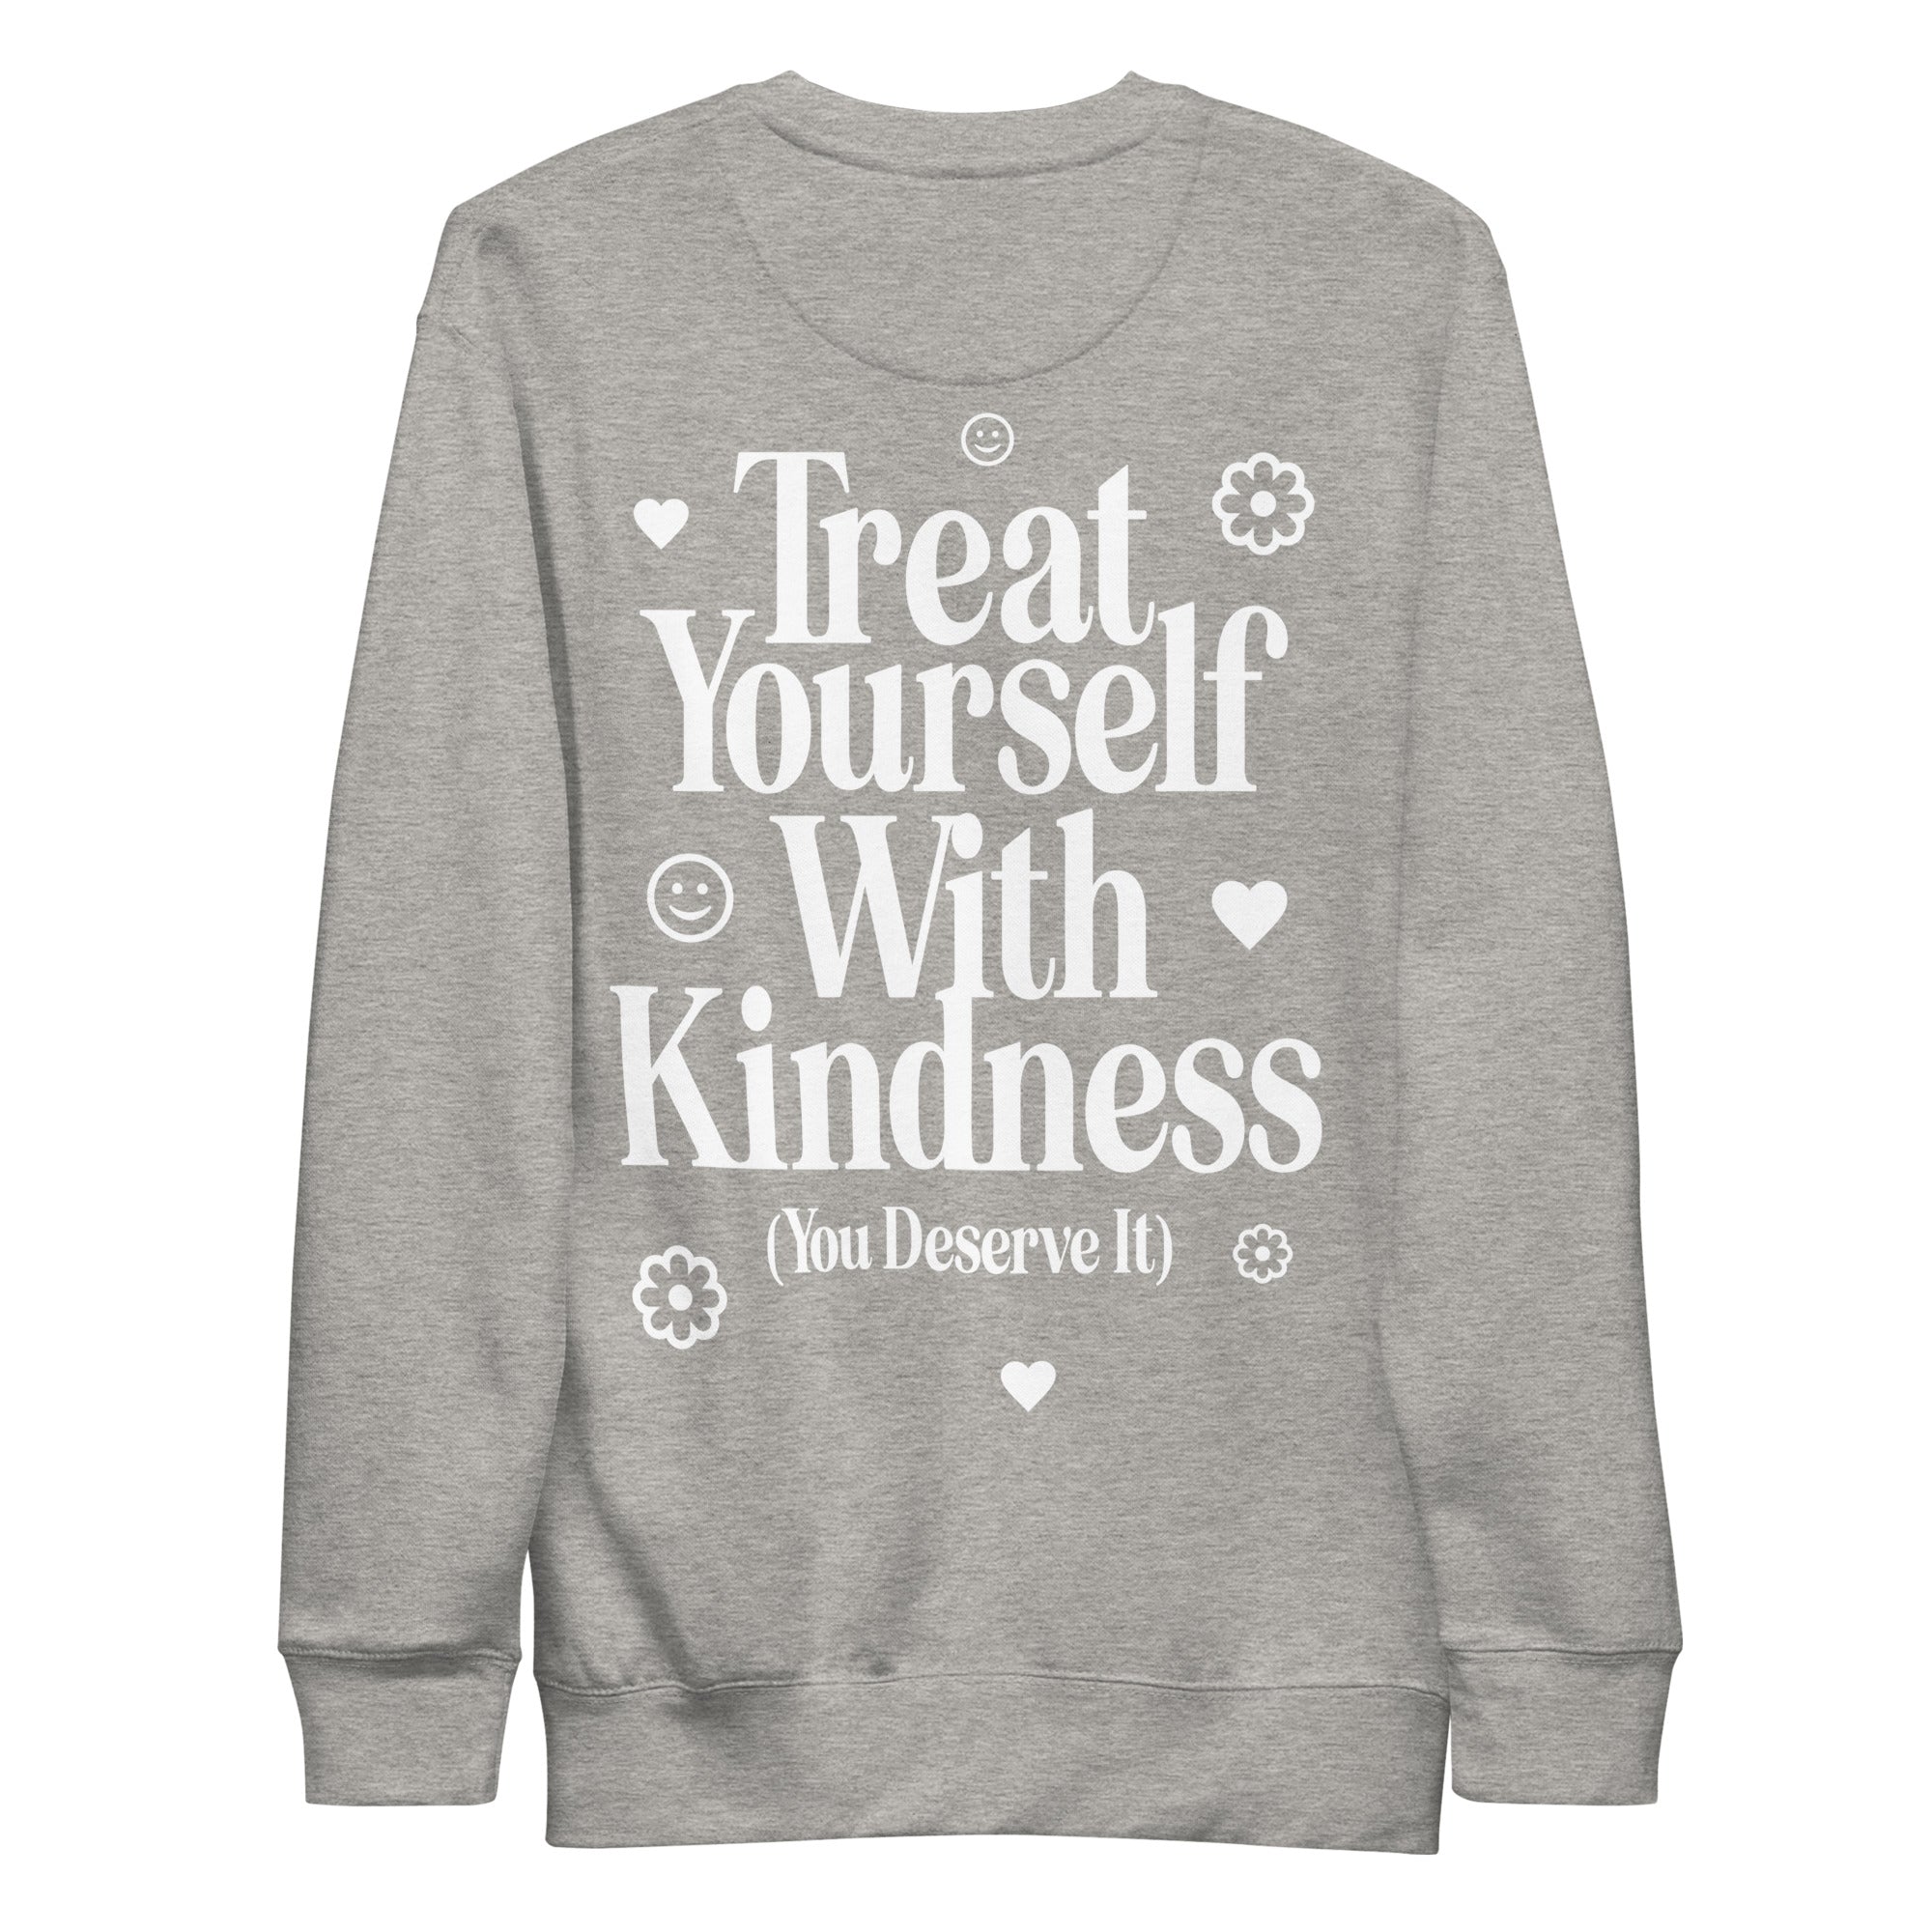 'Treat Yourself With Kindness' Green Brick Boutique Unisex Sweatshirt - Shirts & Tops - The Green Brick Boutique